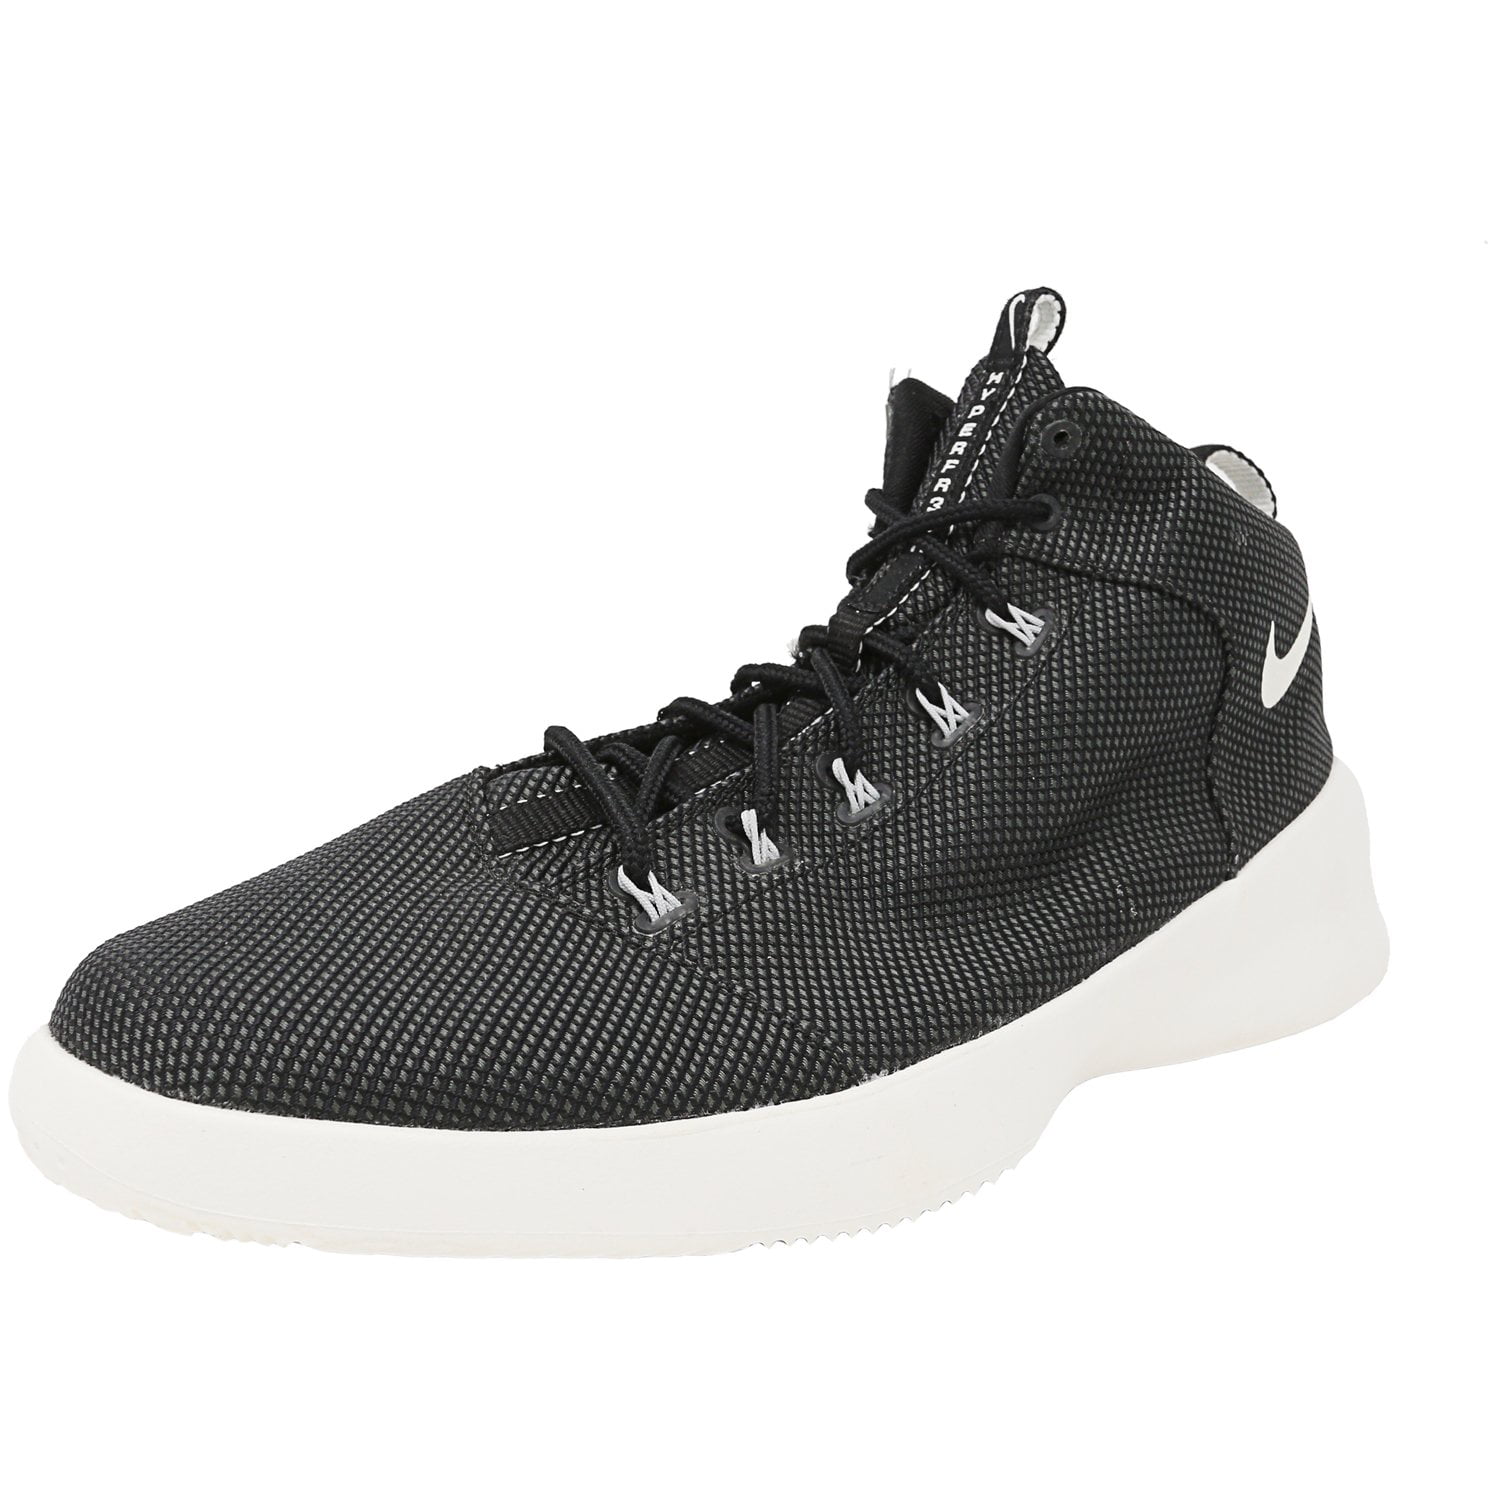 Nike Men's 759996 001 Ankle-High Fabric Basketball Shoe - 11.5M ...